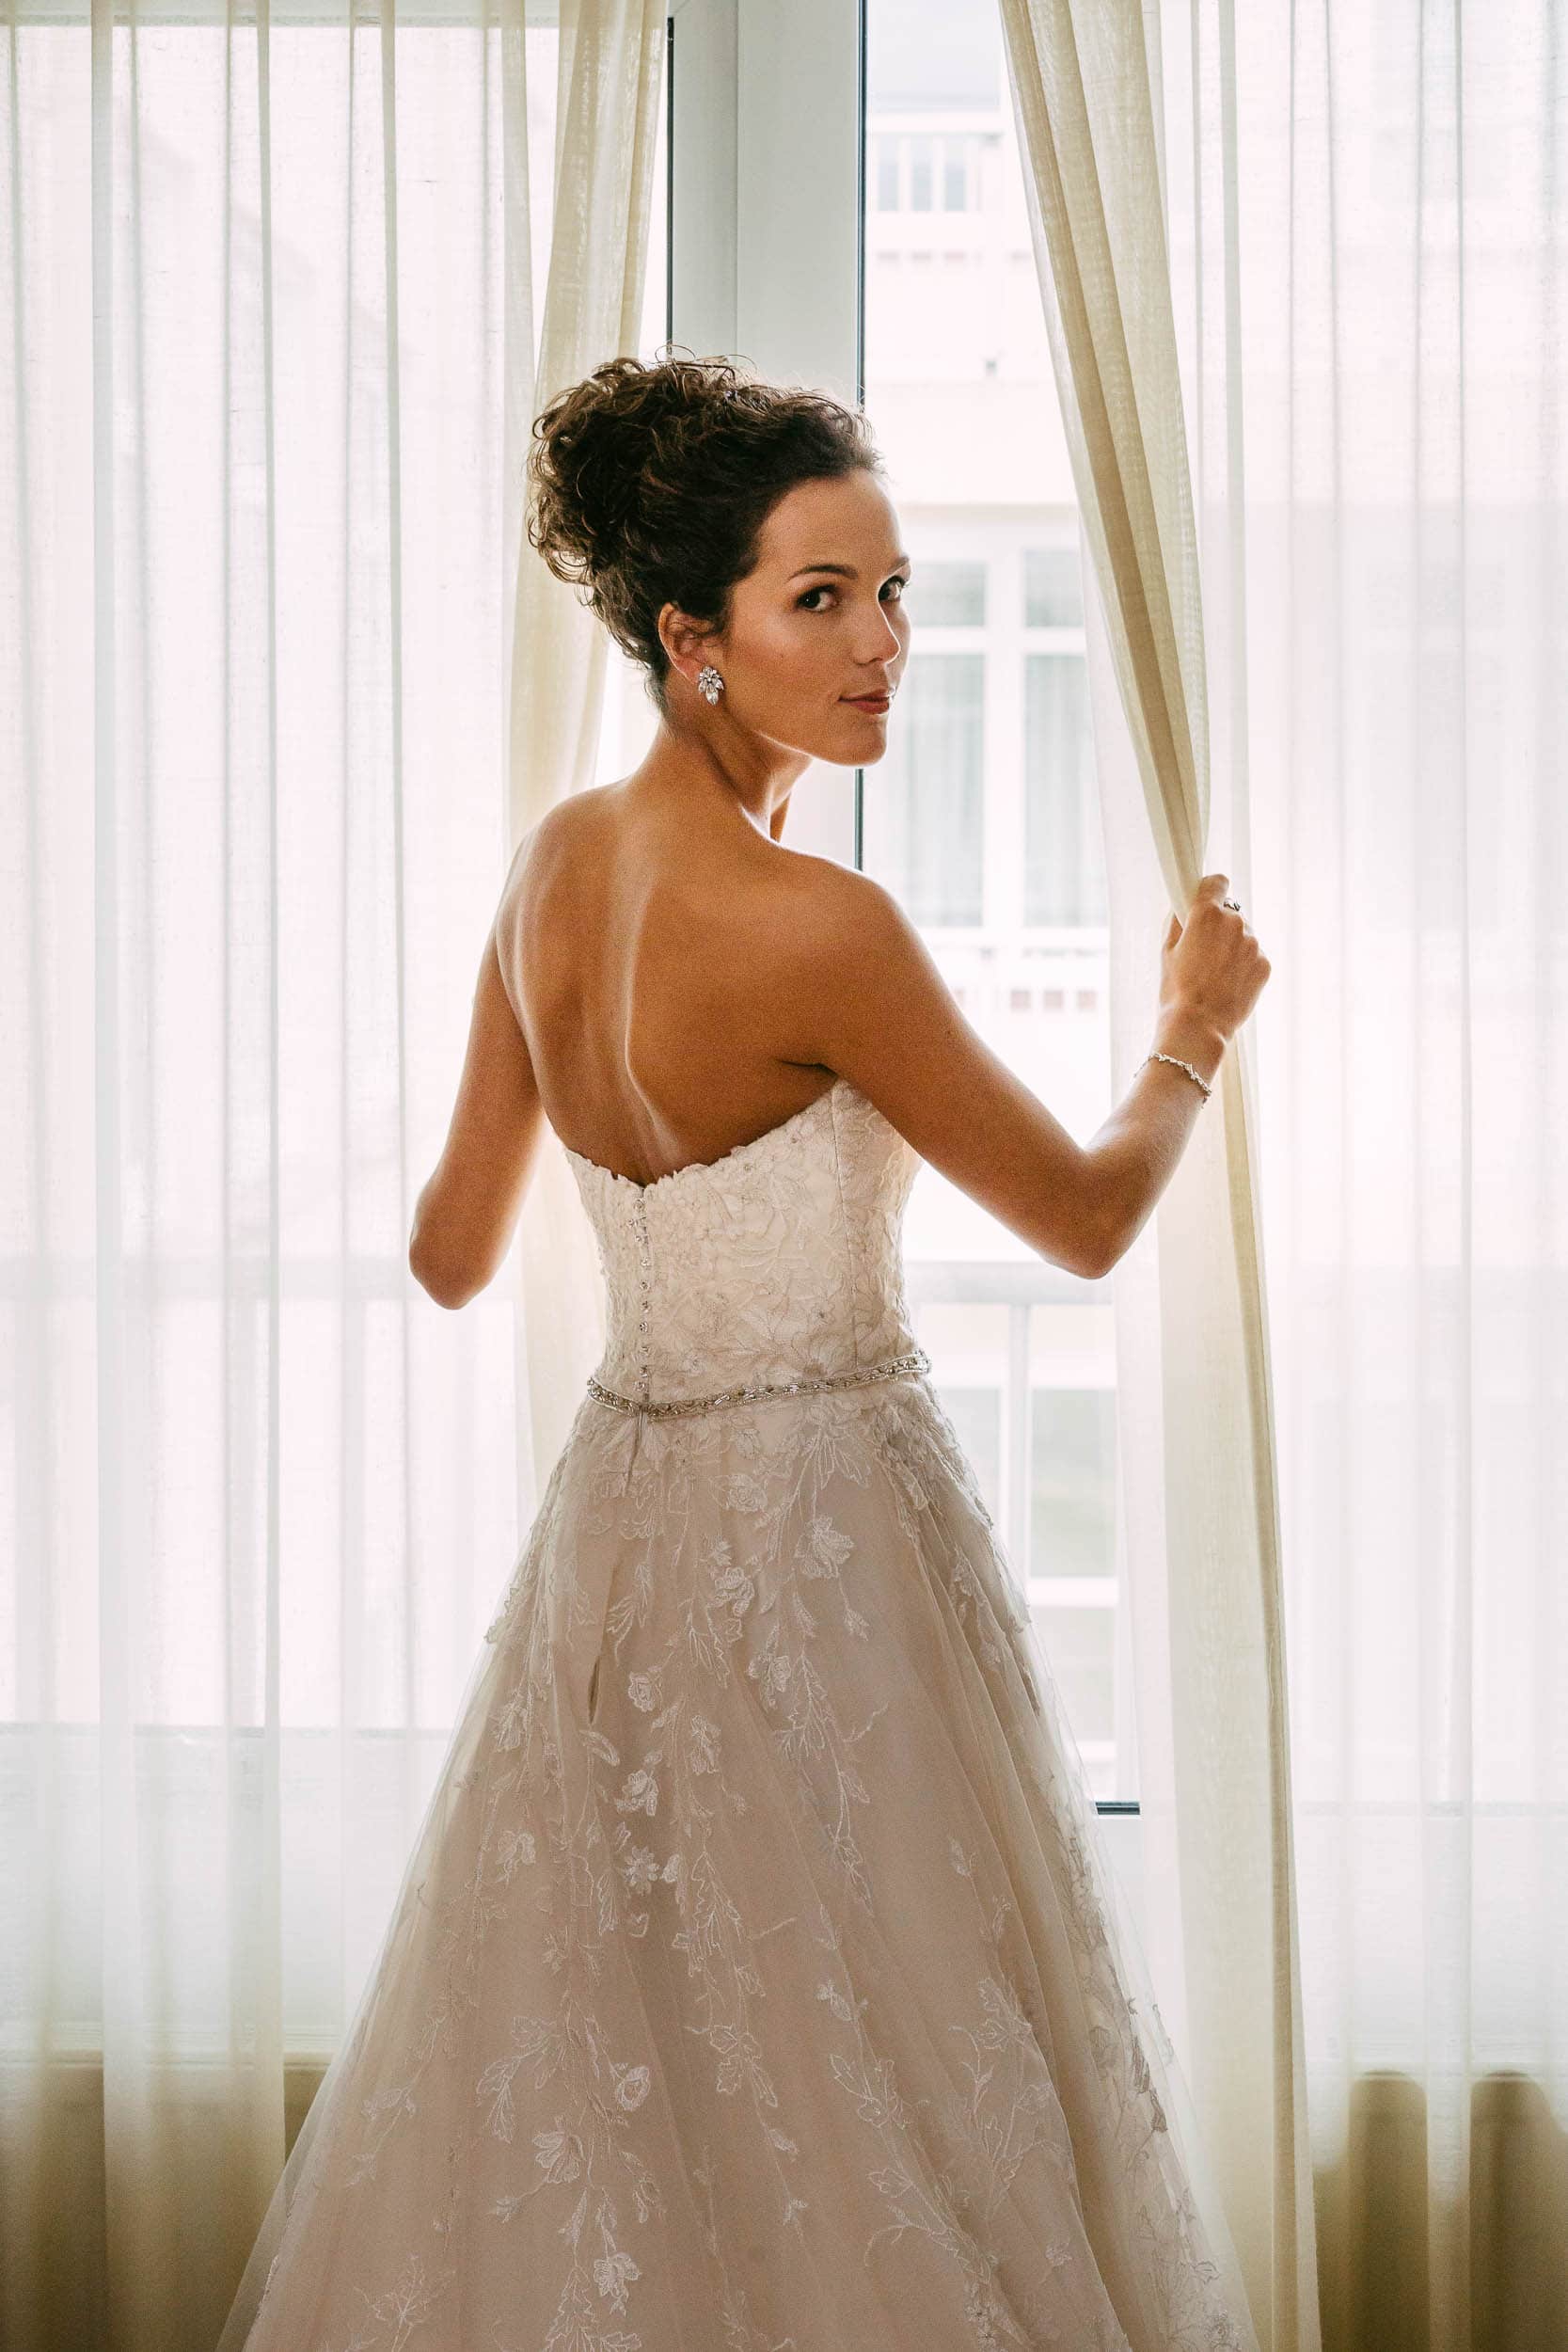 A bride in a wedding dress stands in front of a window.